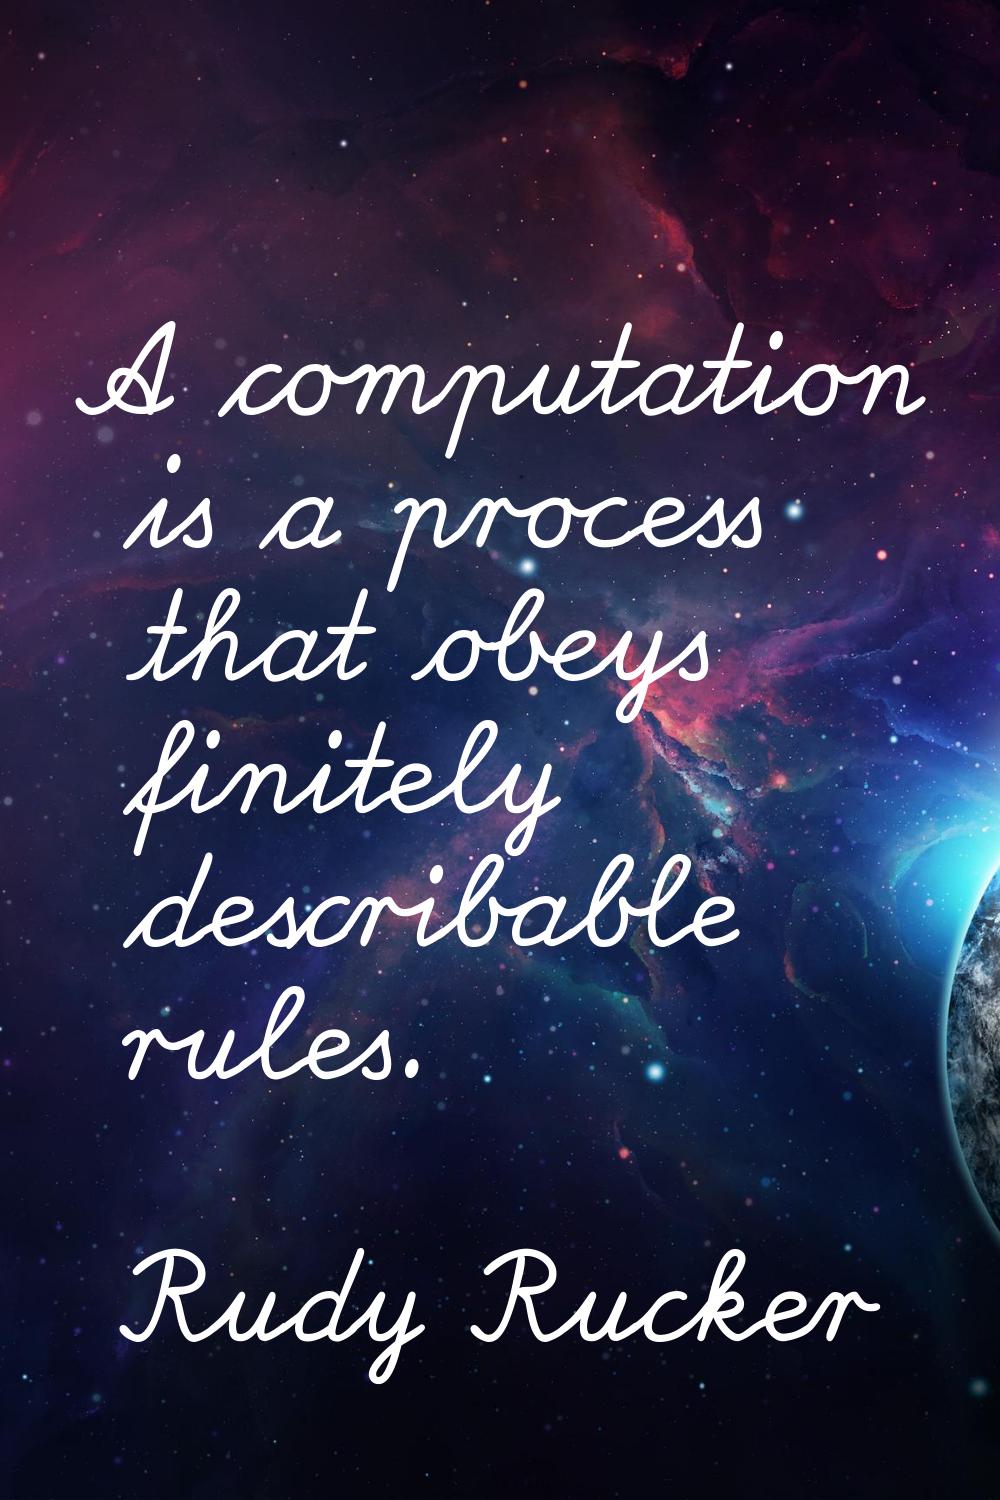 A computation is a process that obeys finitely describable rules.